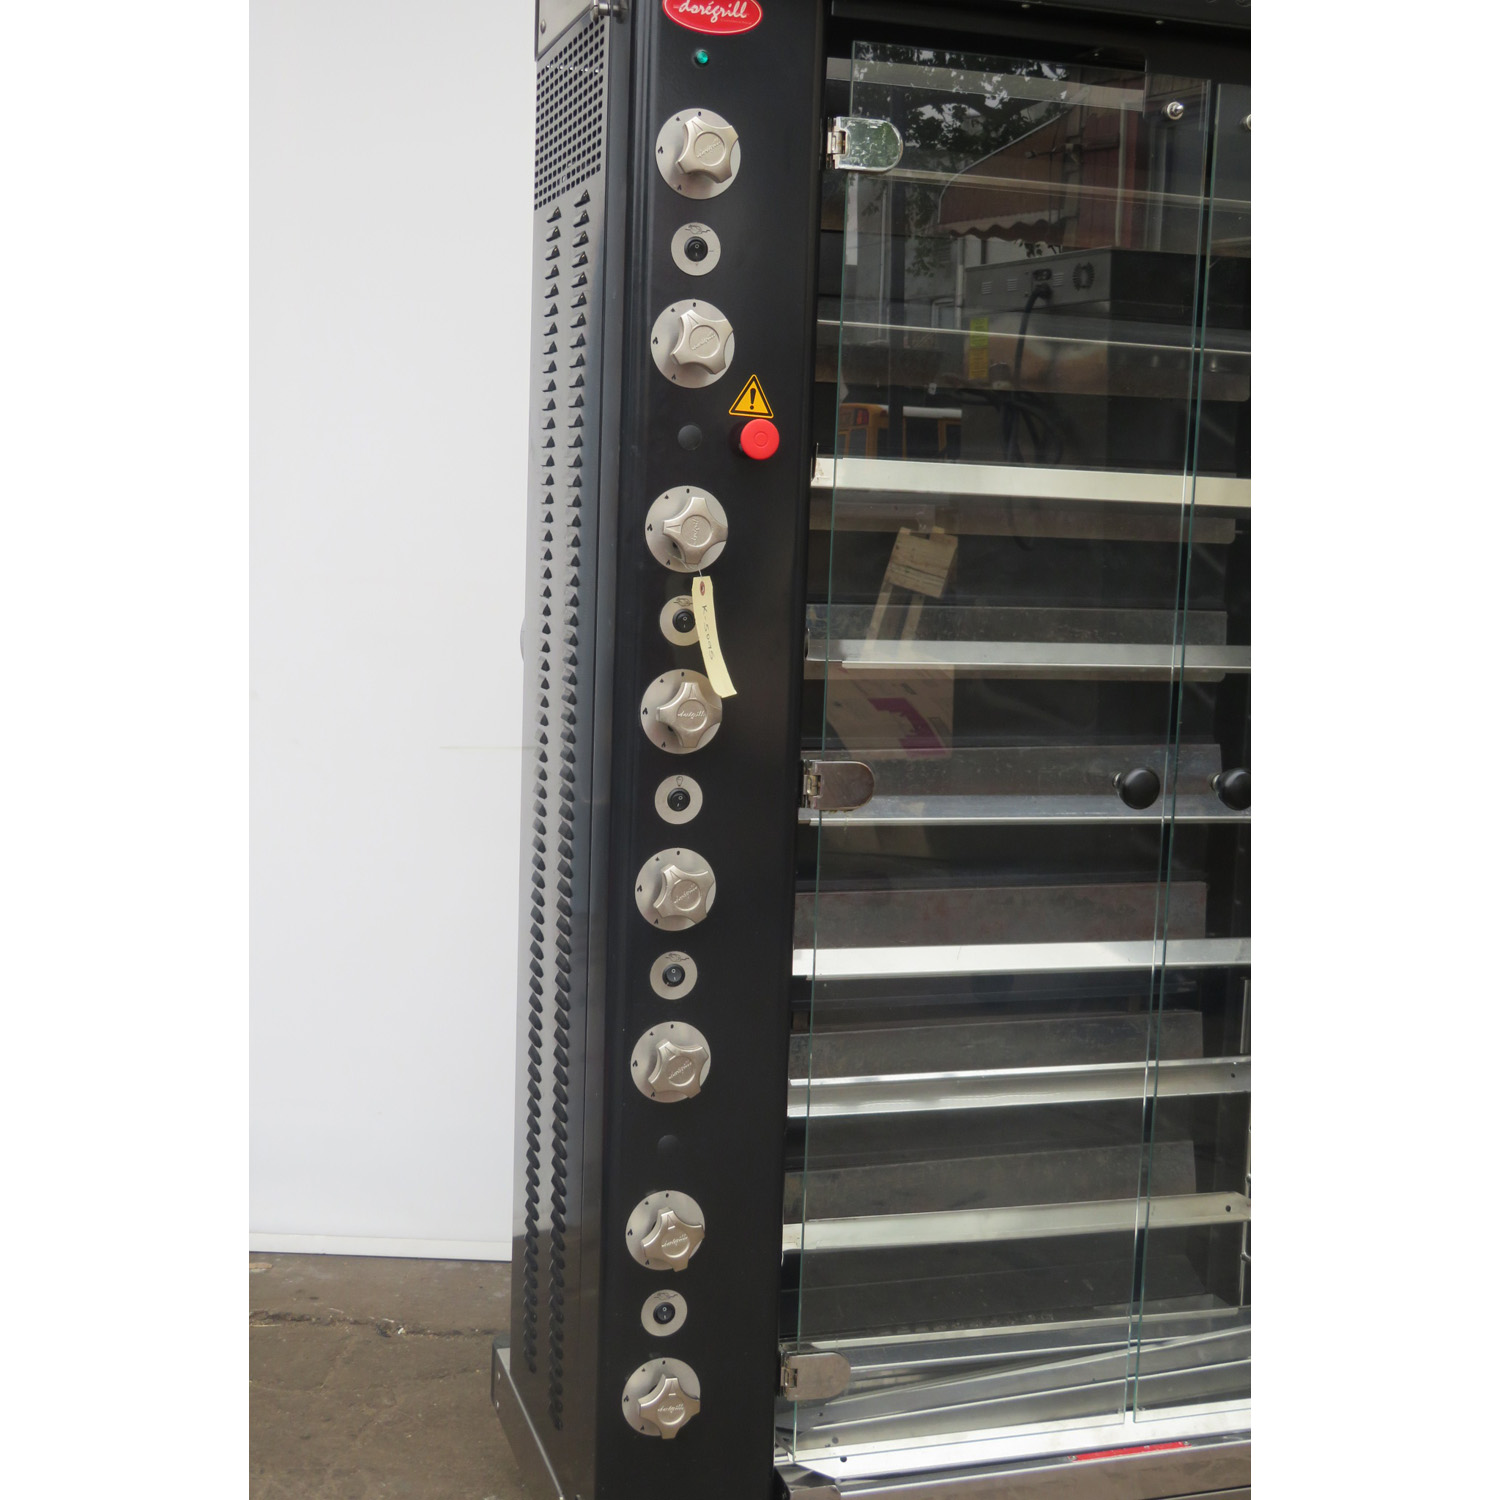 Doregrill MAG-8-GAS Rotisserie 8 Spit, Used Great Condition image 2